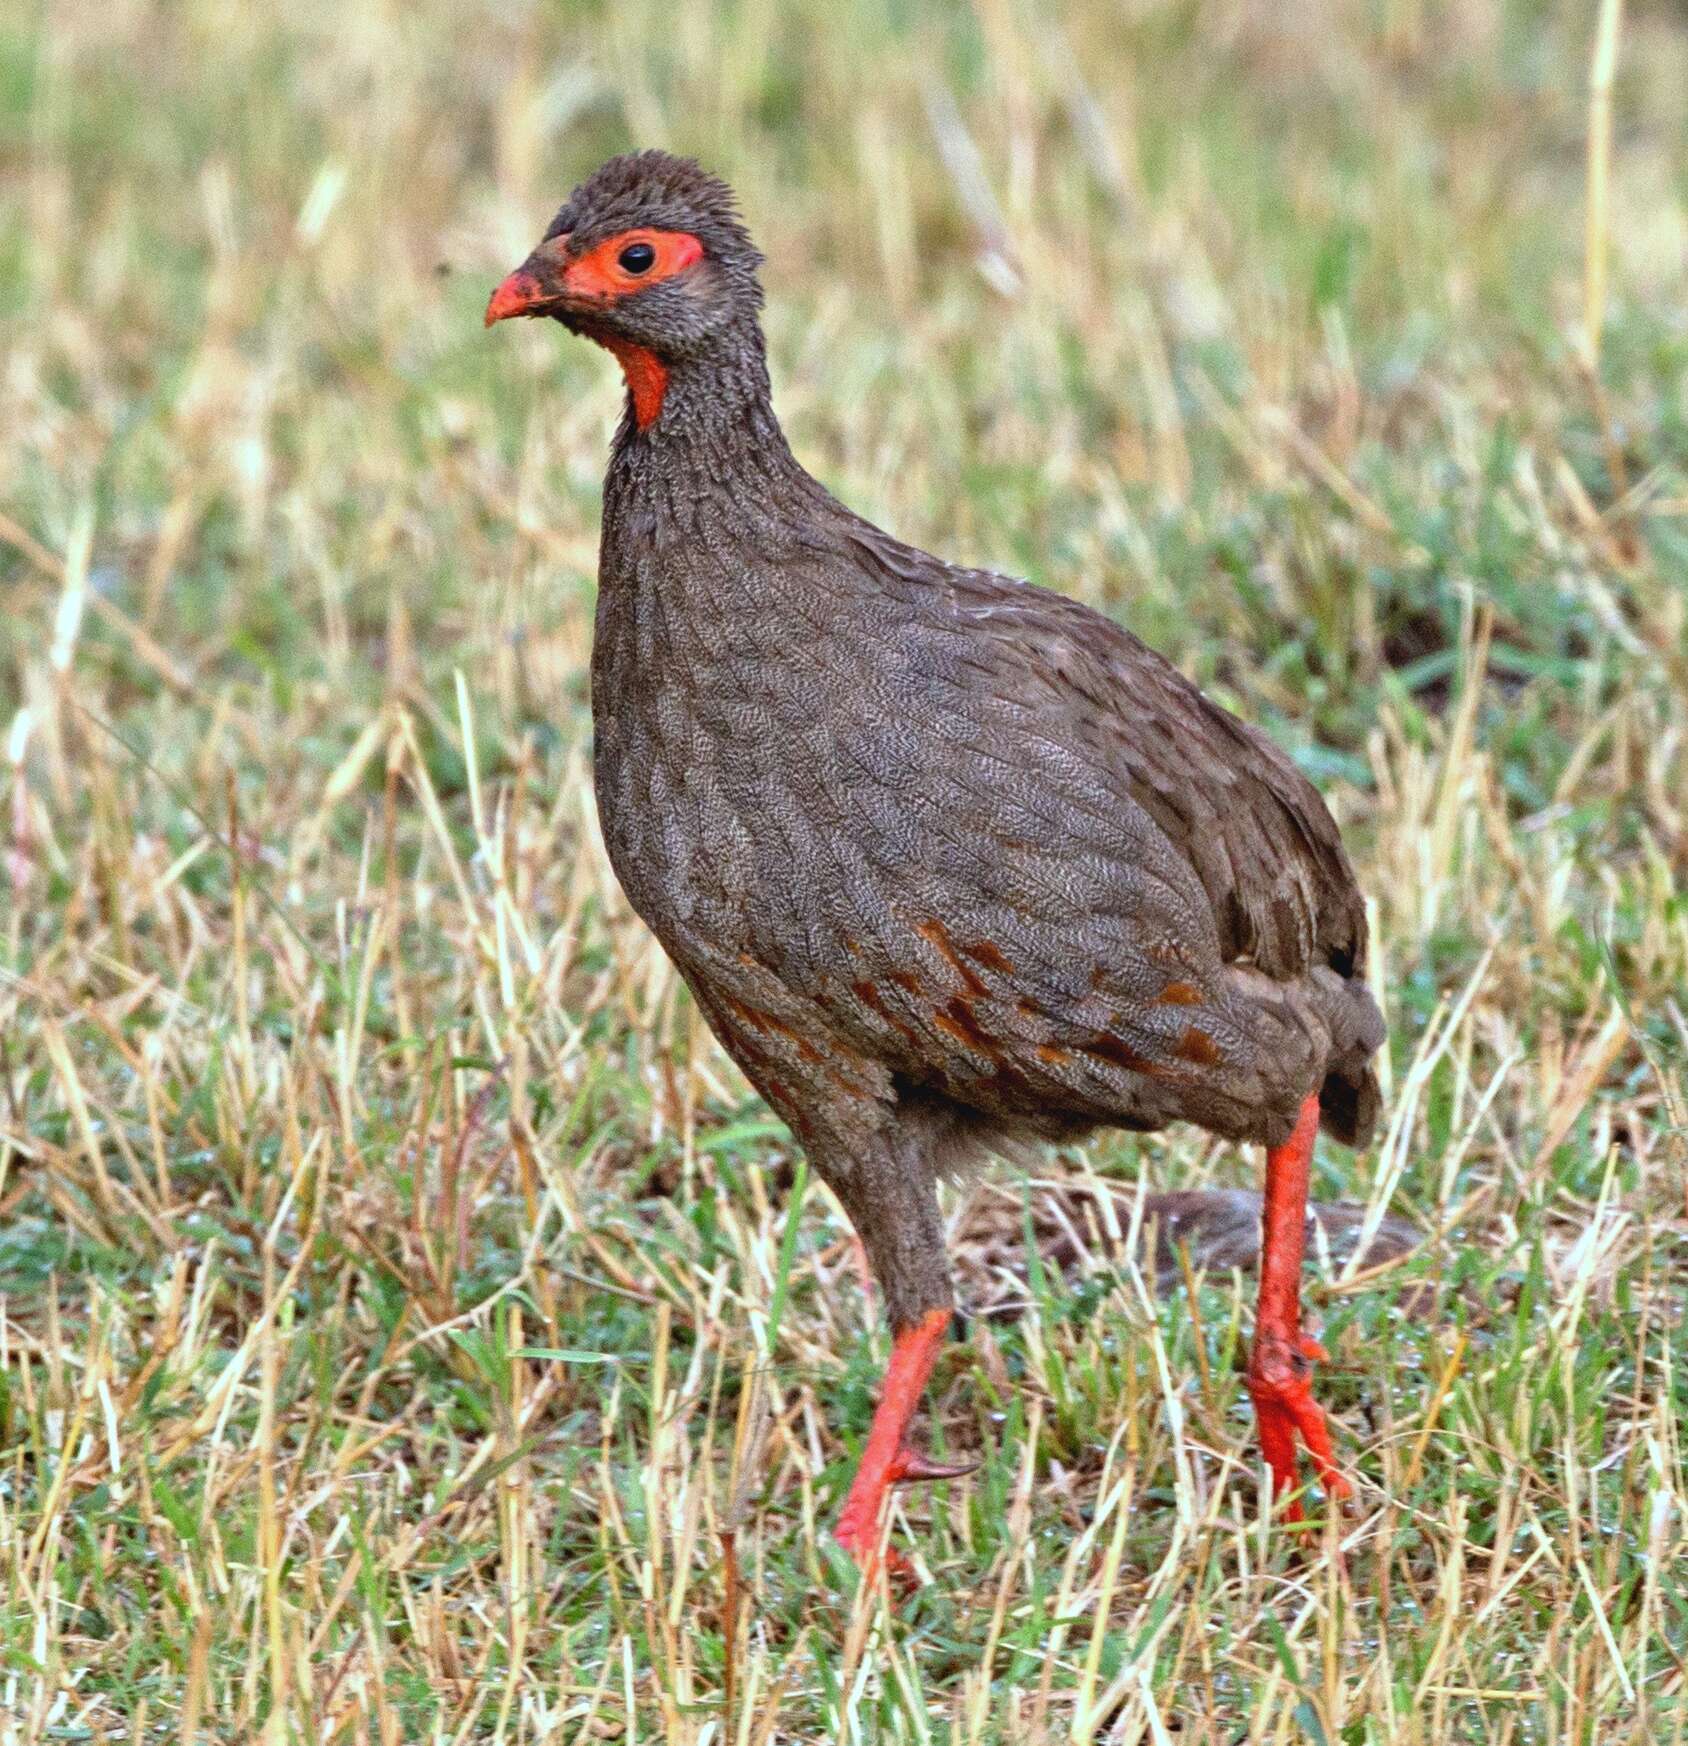 Image of Red-necked Francolin